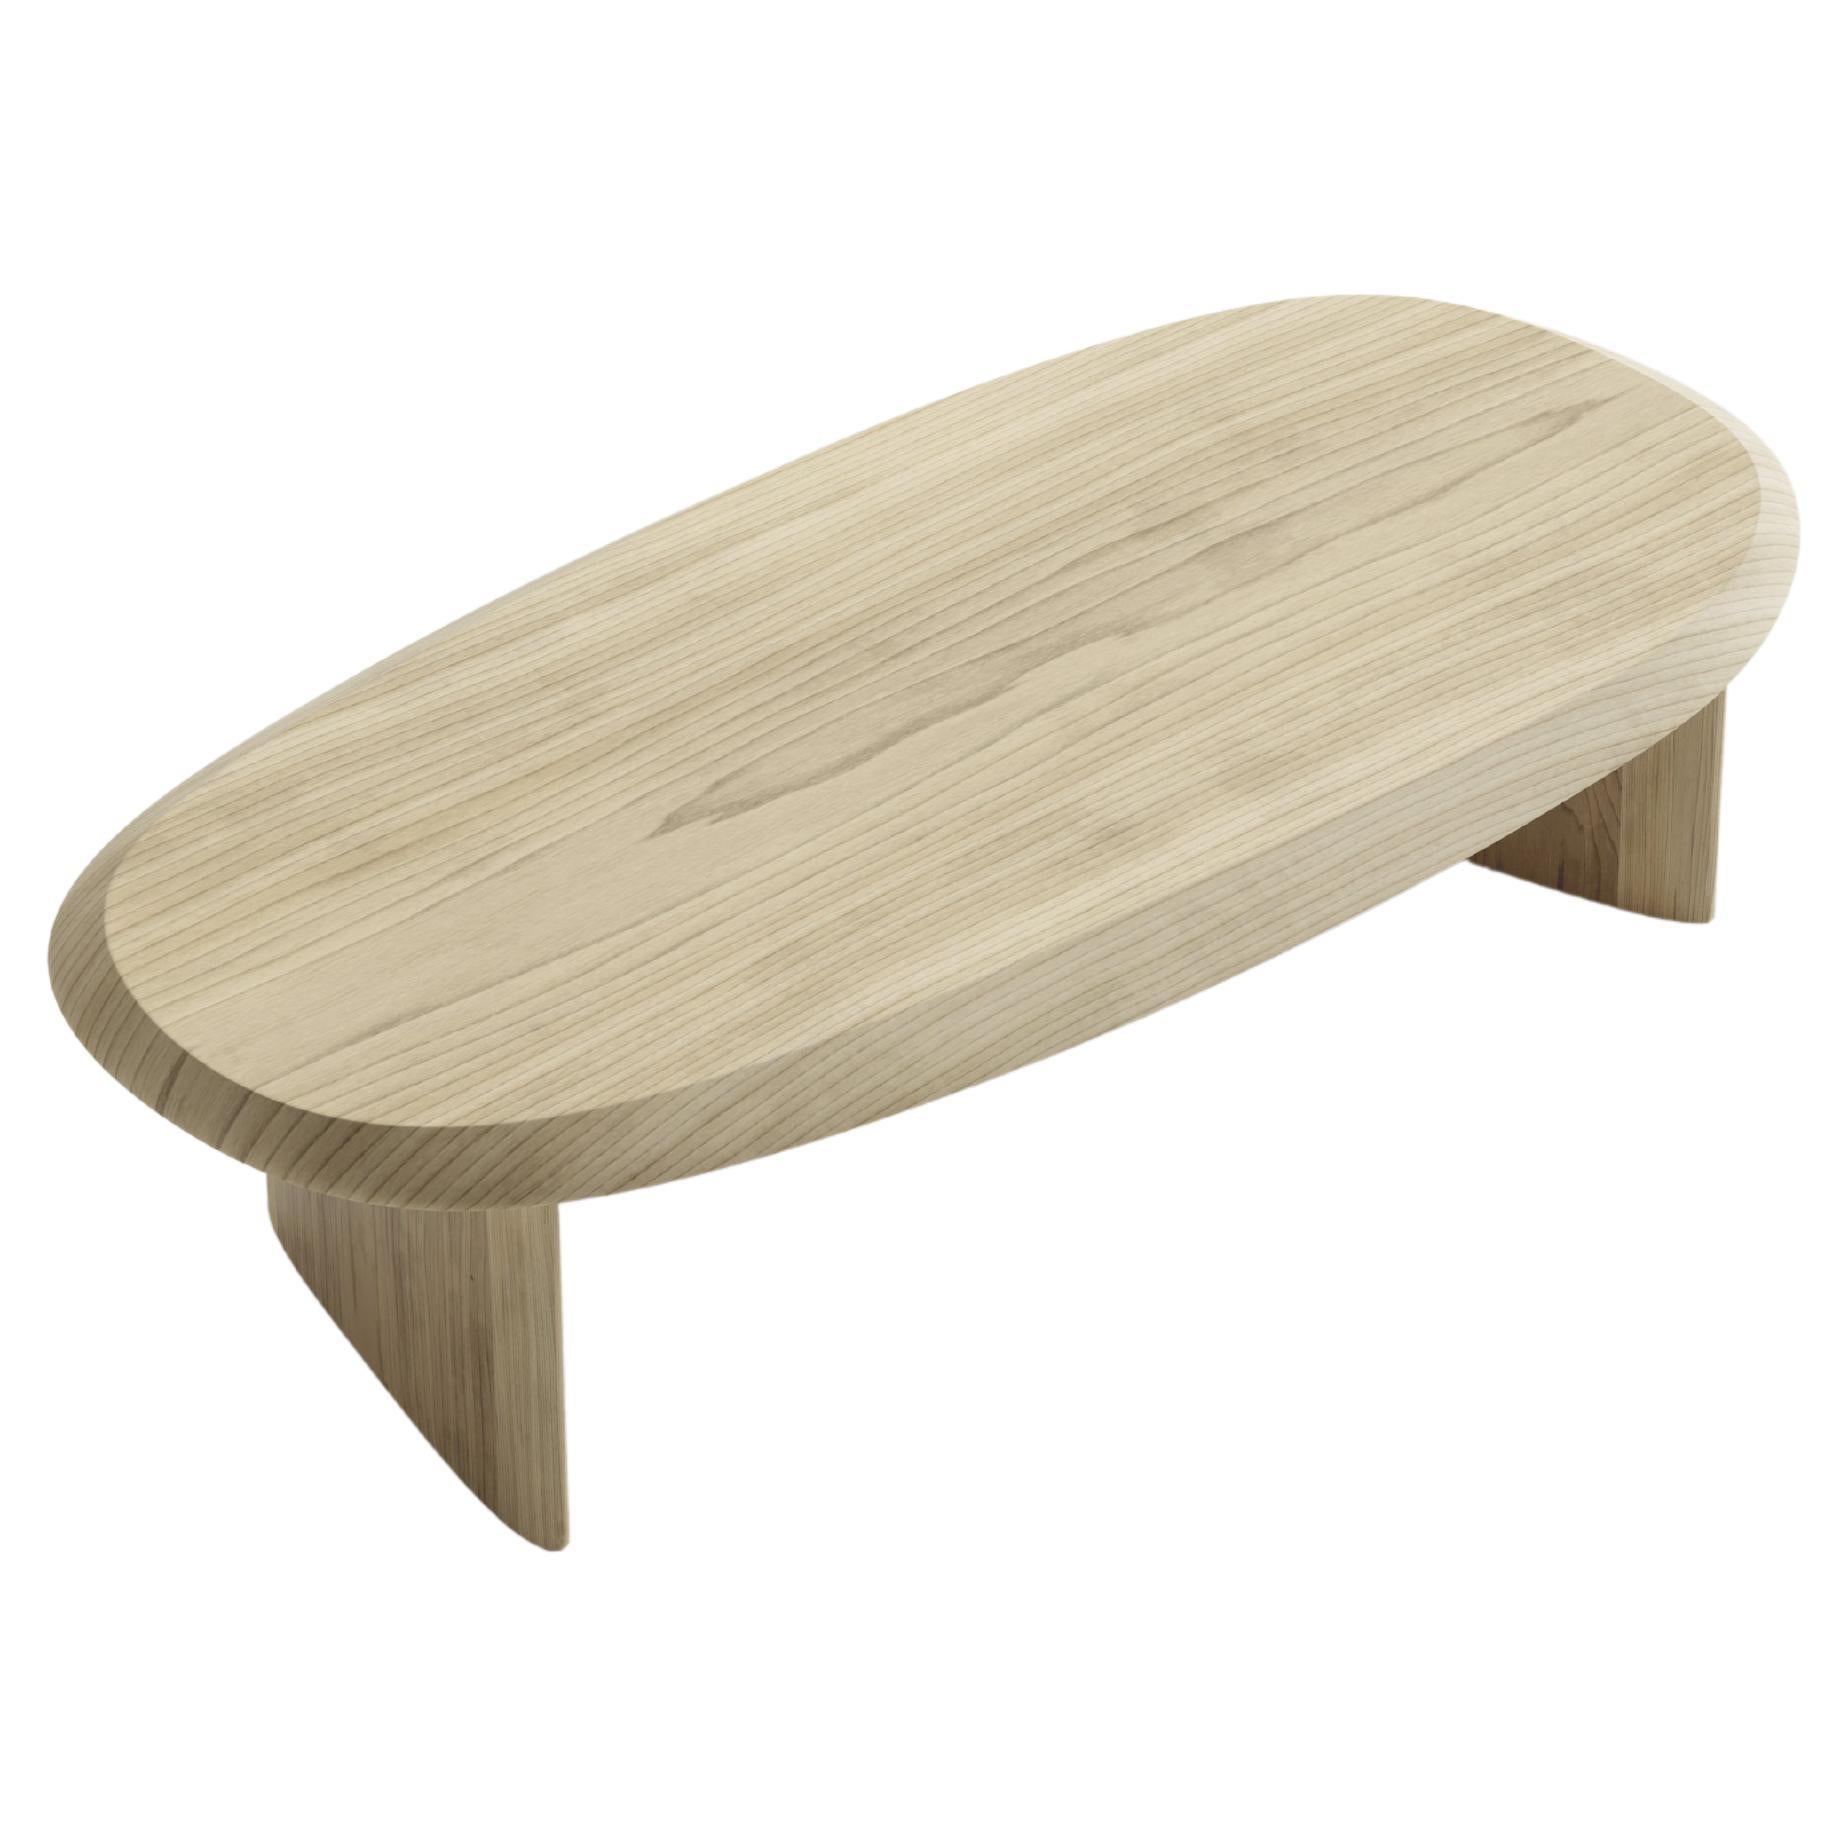 Duna Rectangular Coffee Table in Solid Poplar Wood Coffee Table by Joel Escalona For Sale